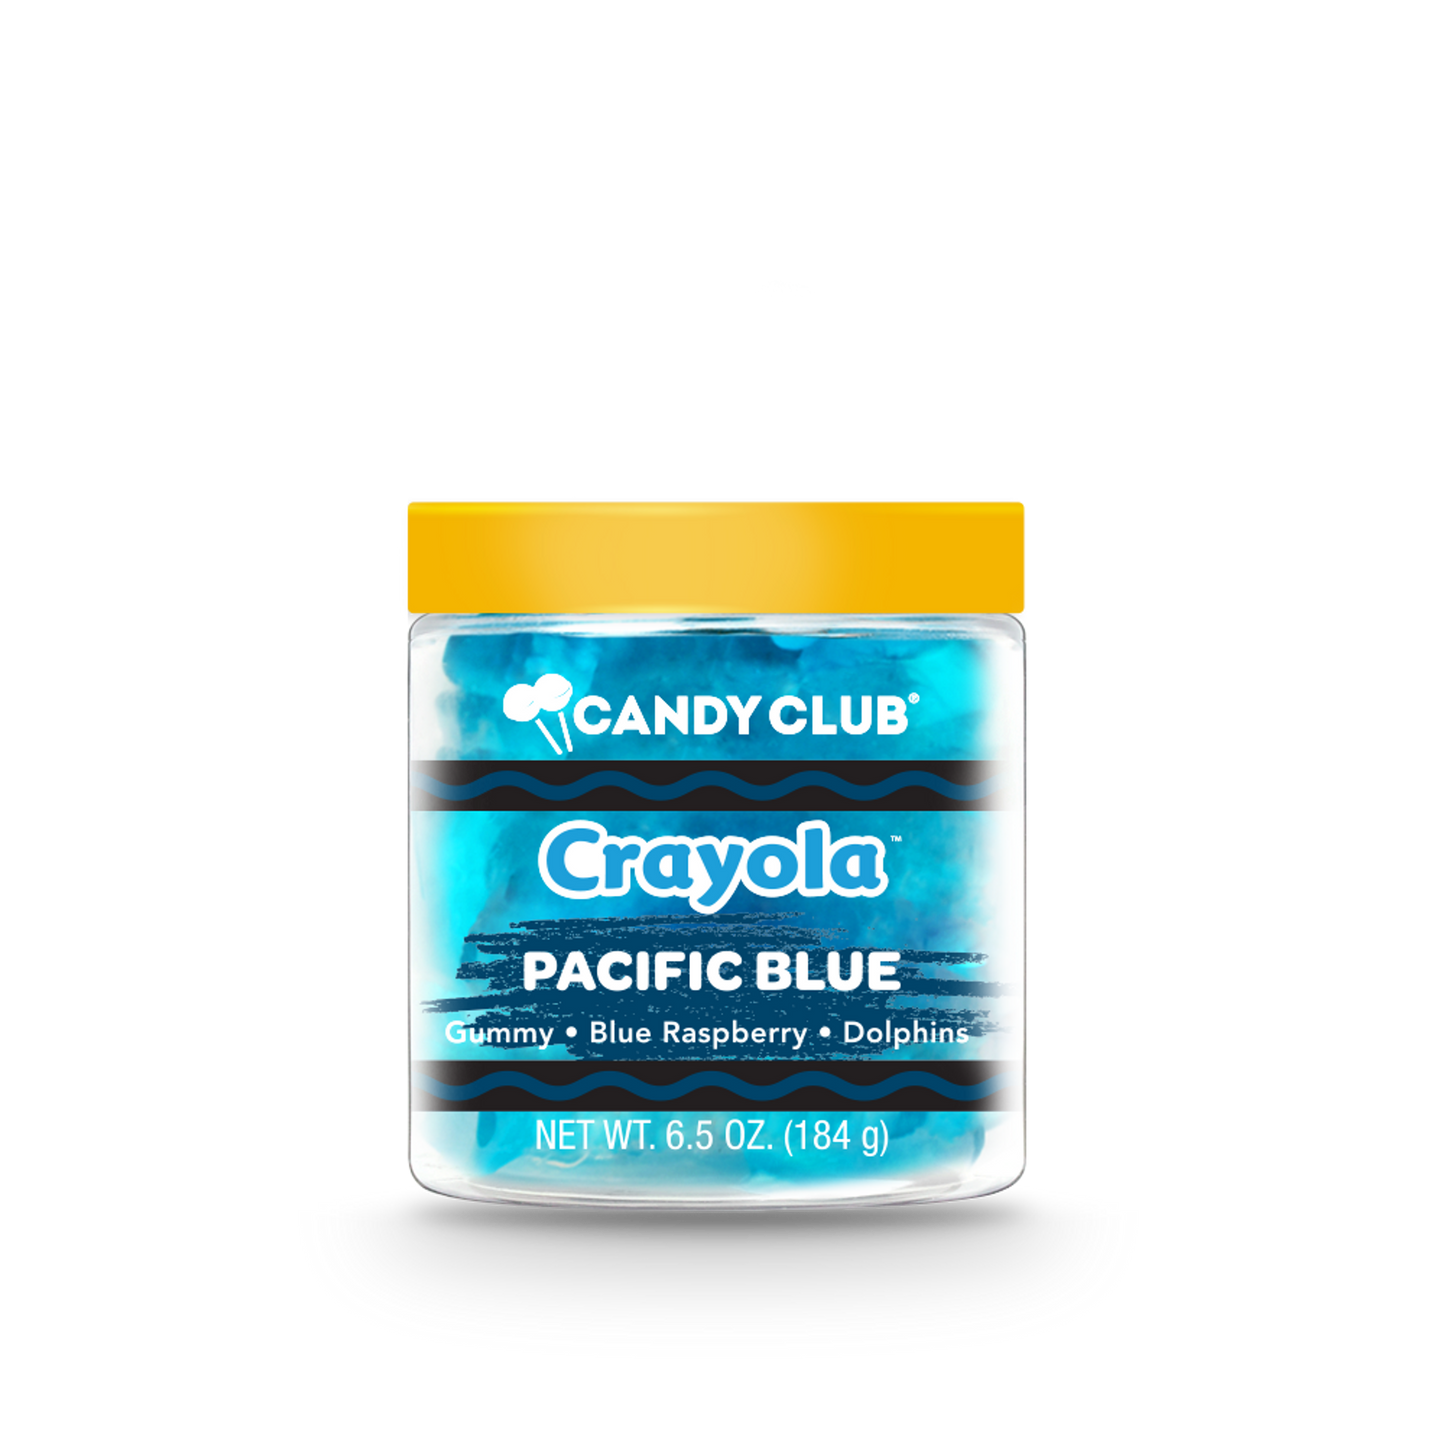 Pacific Blue Crayola - Candy Club Gourmet Candy